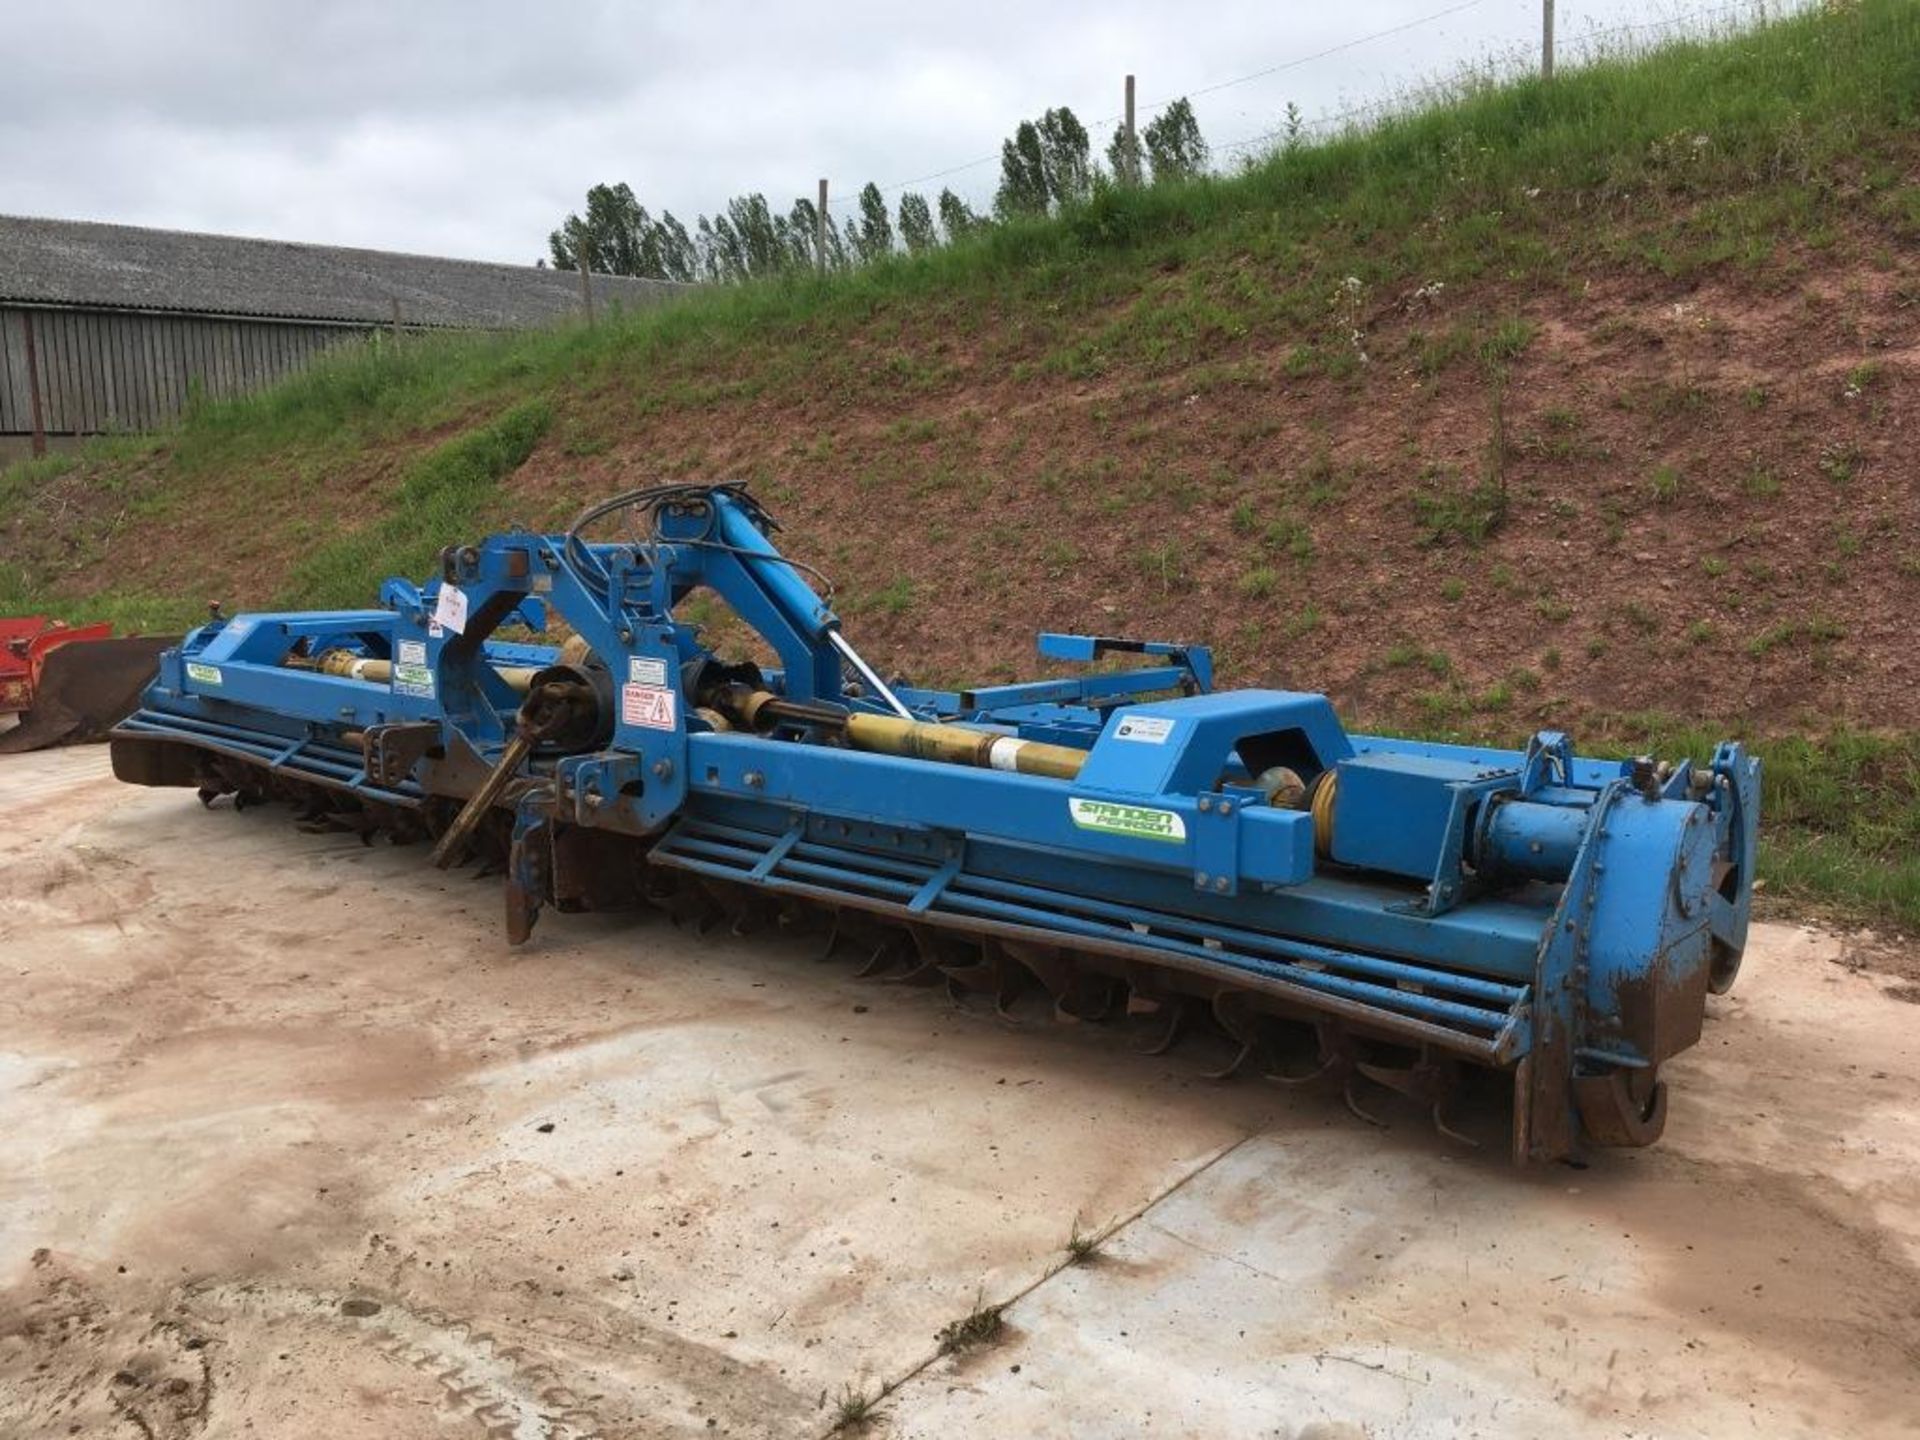 Standen folding rotovator, Type PV400240, serial number: 509 (2008) (missing guarding and damage